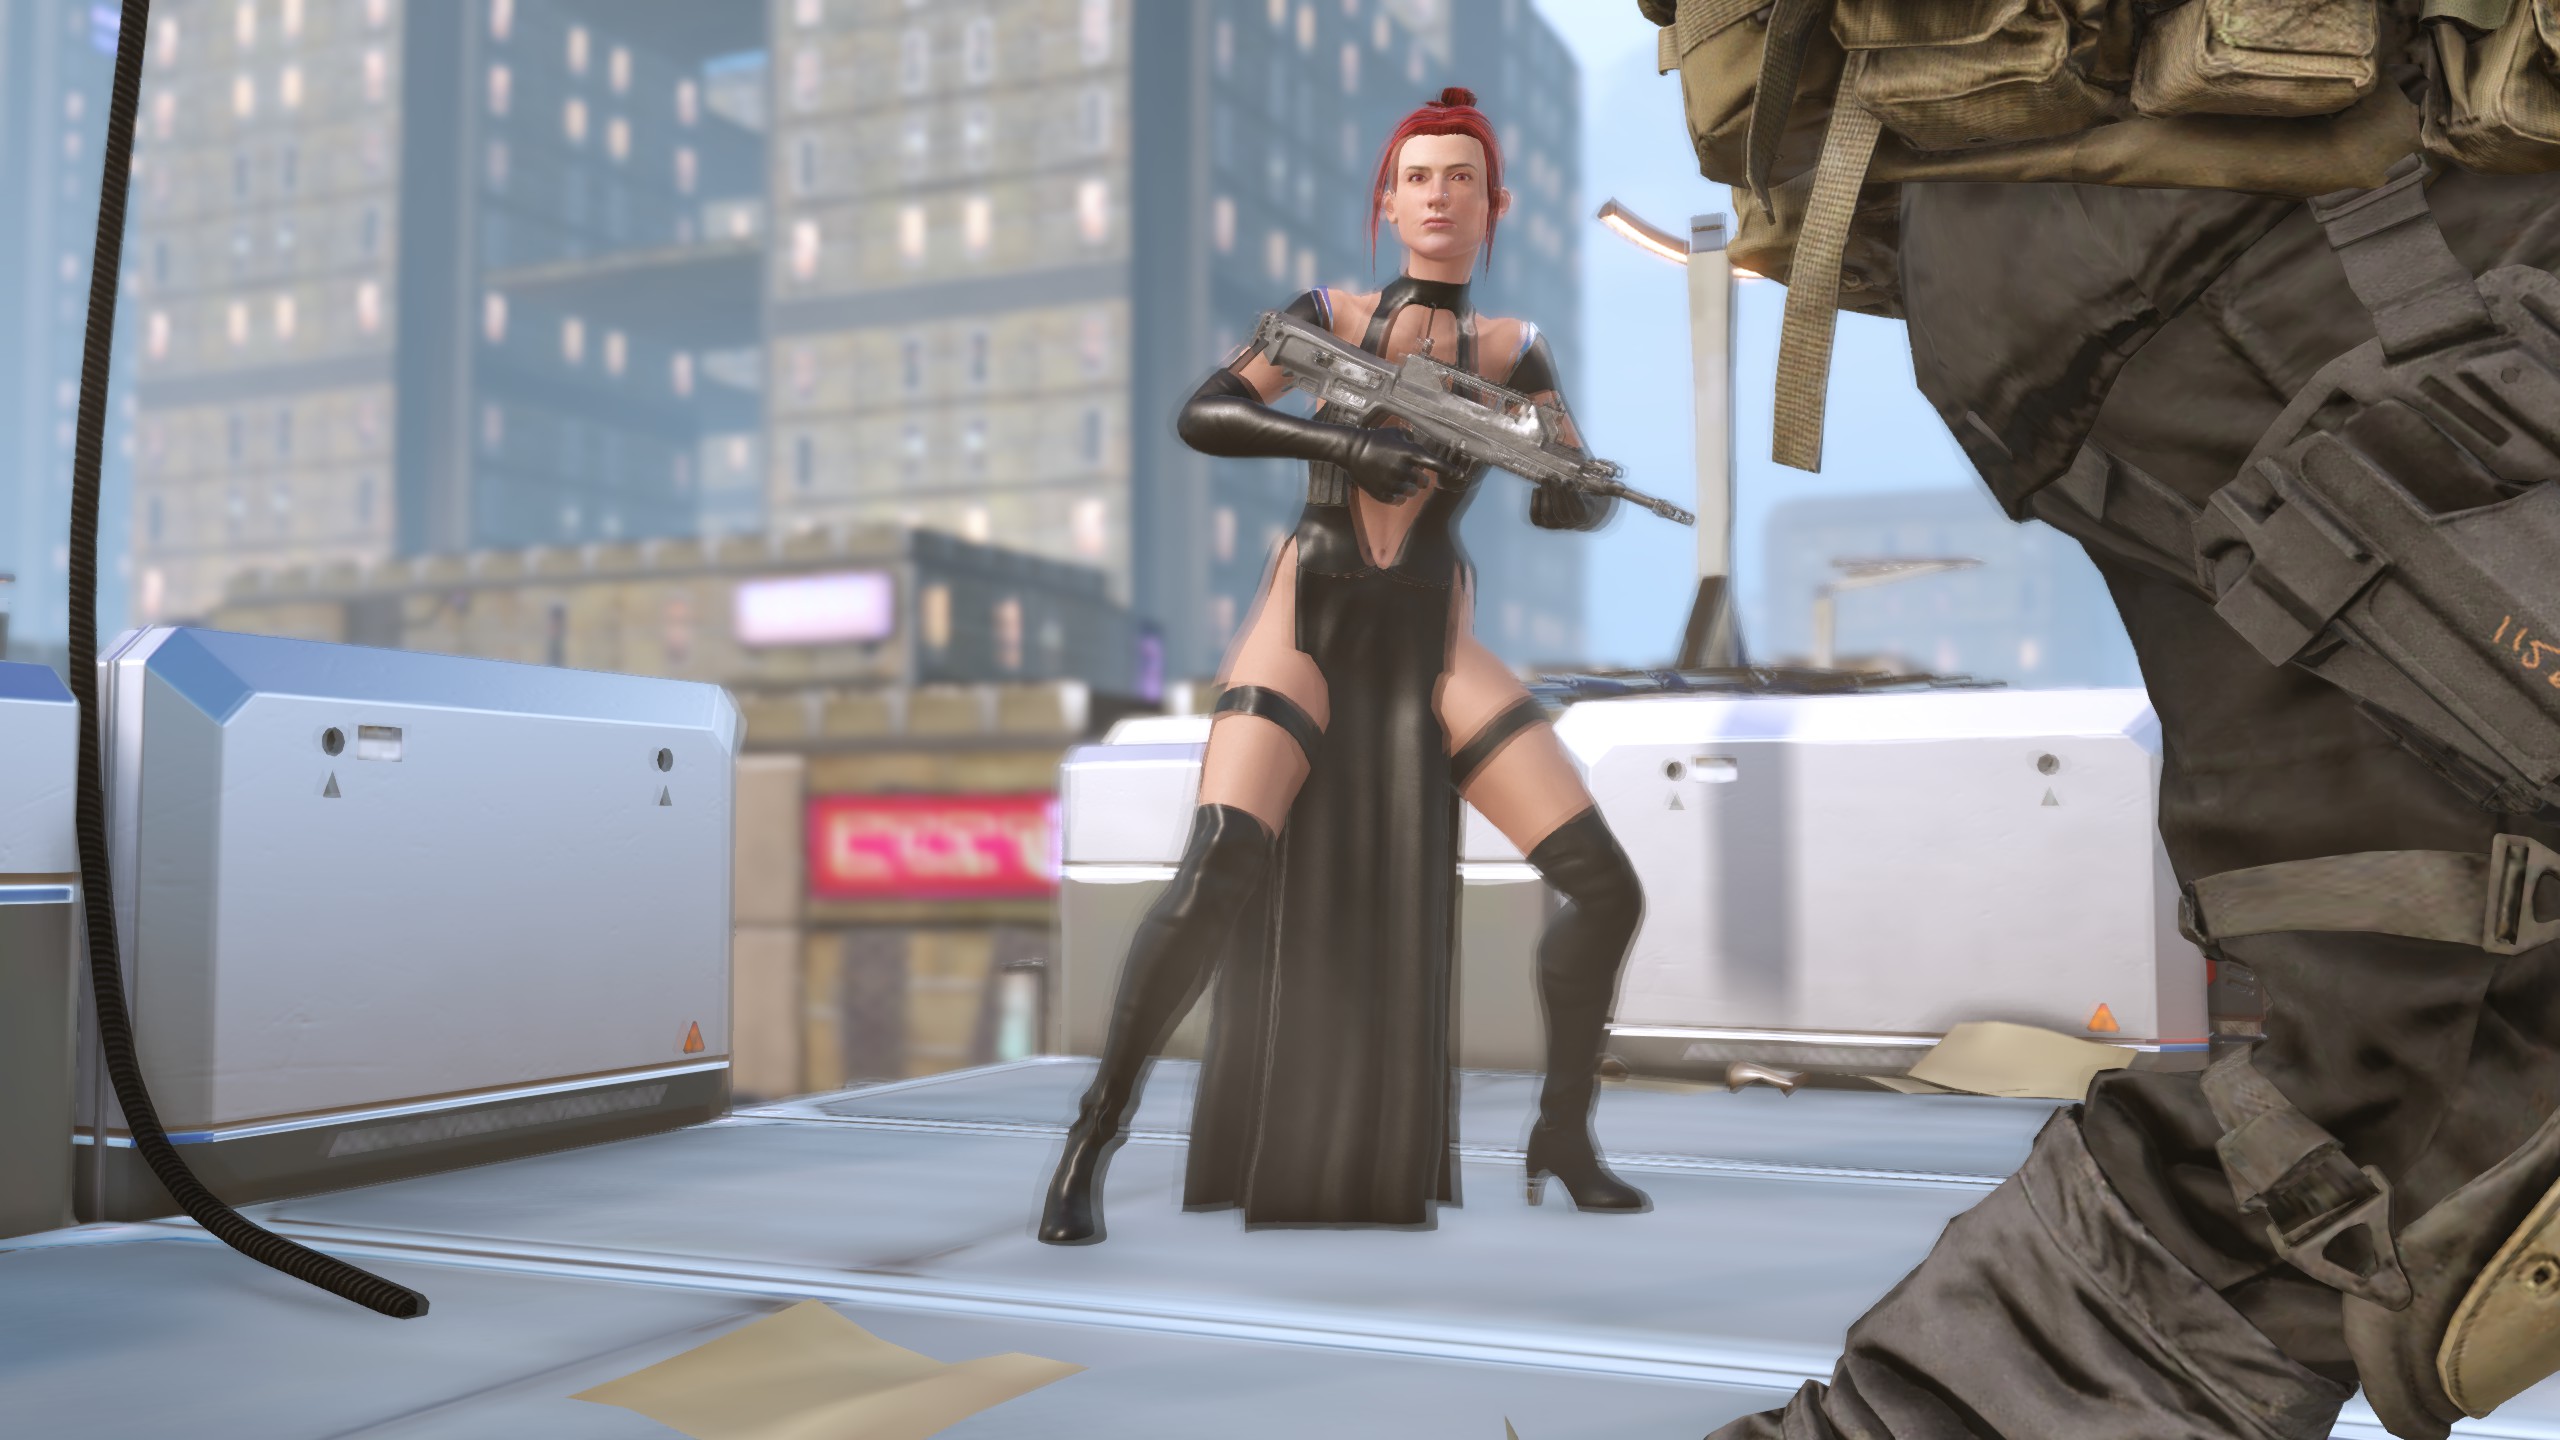 XCom 2: War of the Chosen] BloodRayne: Rayne's Outfit by Carbon Fiber Mile